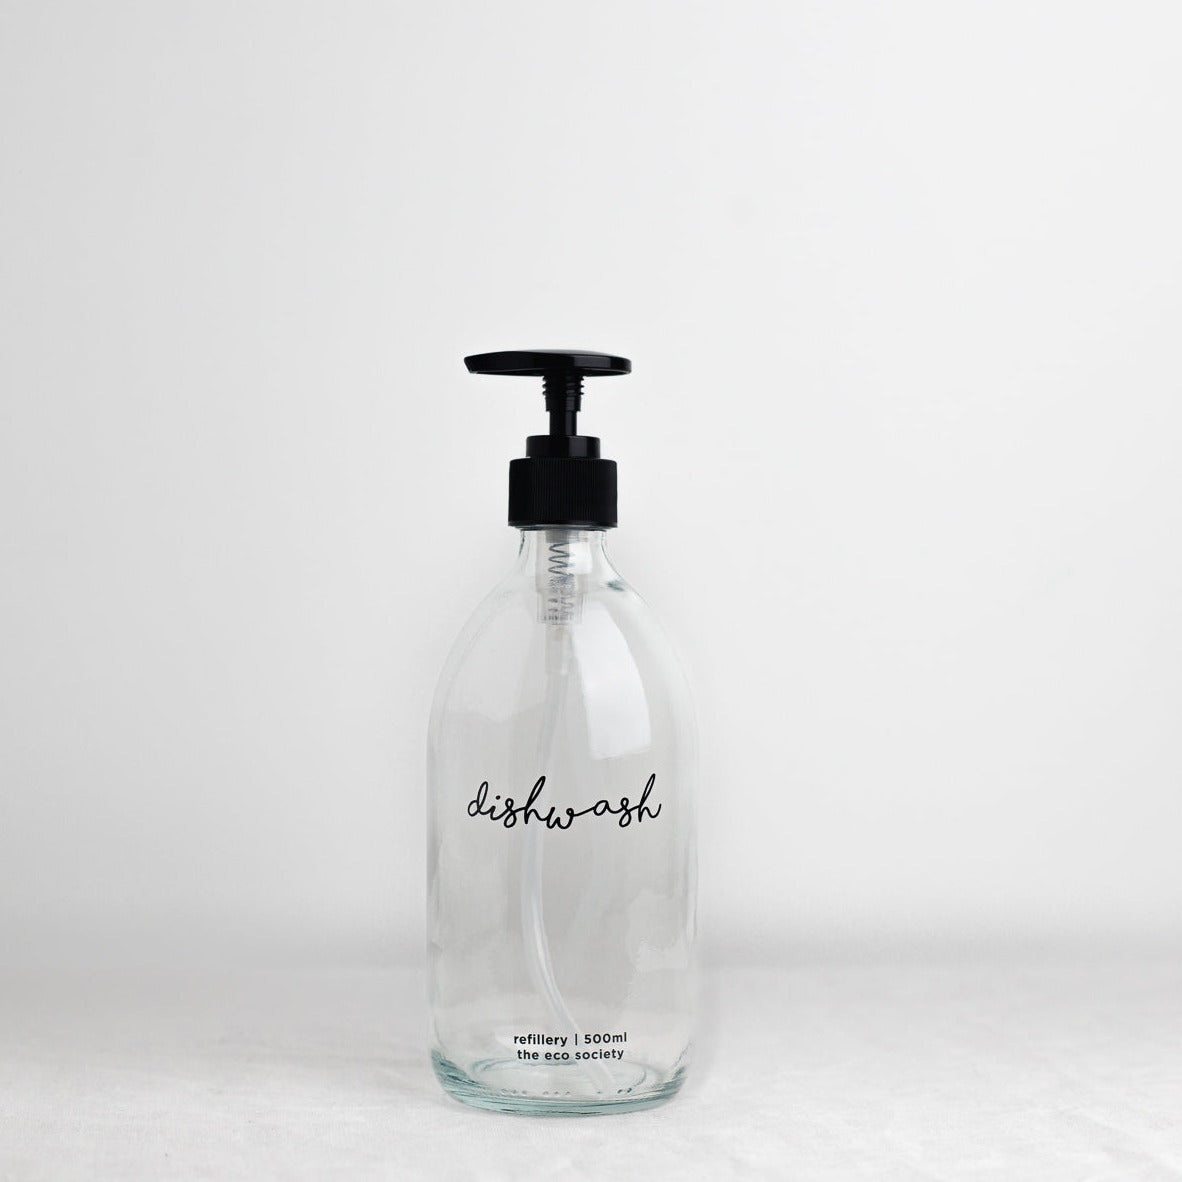 Clear Glass Bottle with Black printed text "Dishwash" 500ml Refillery Bottle